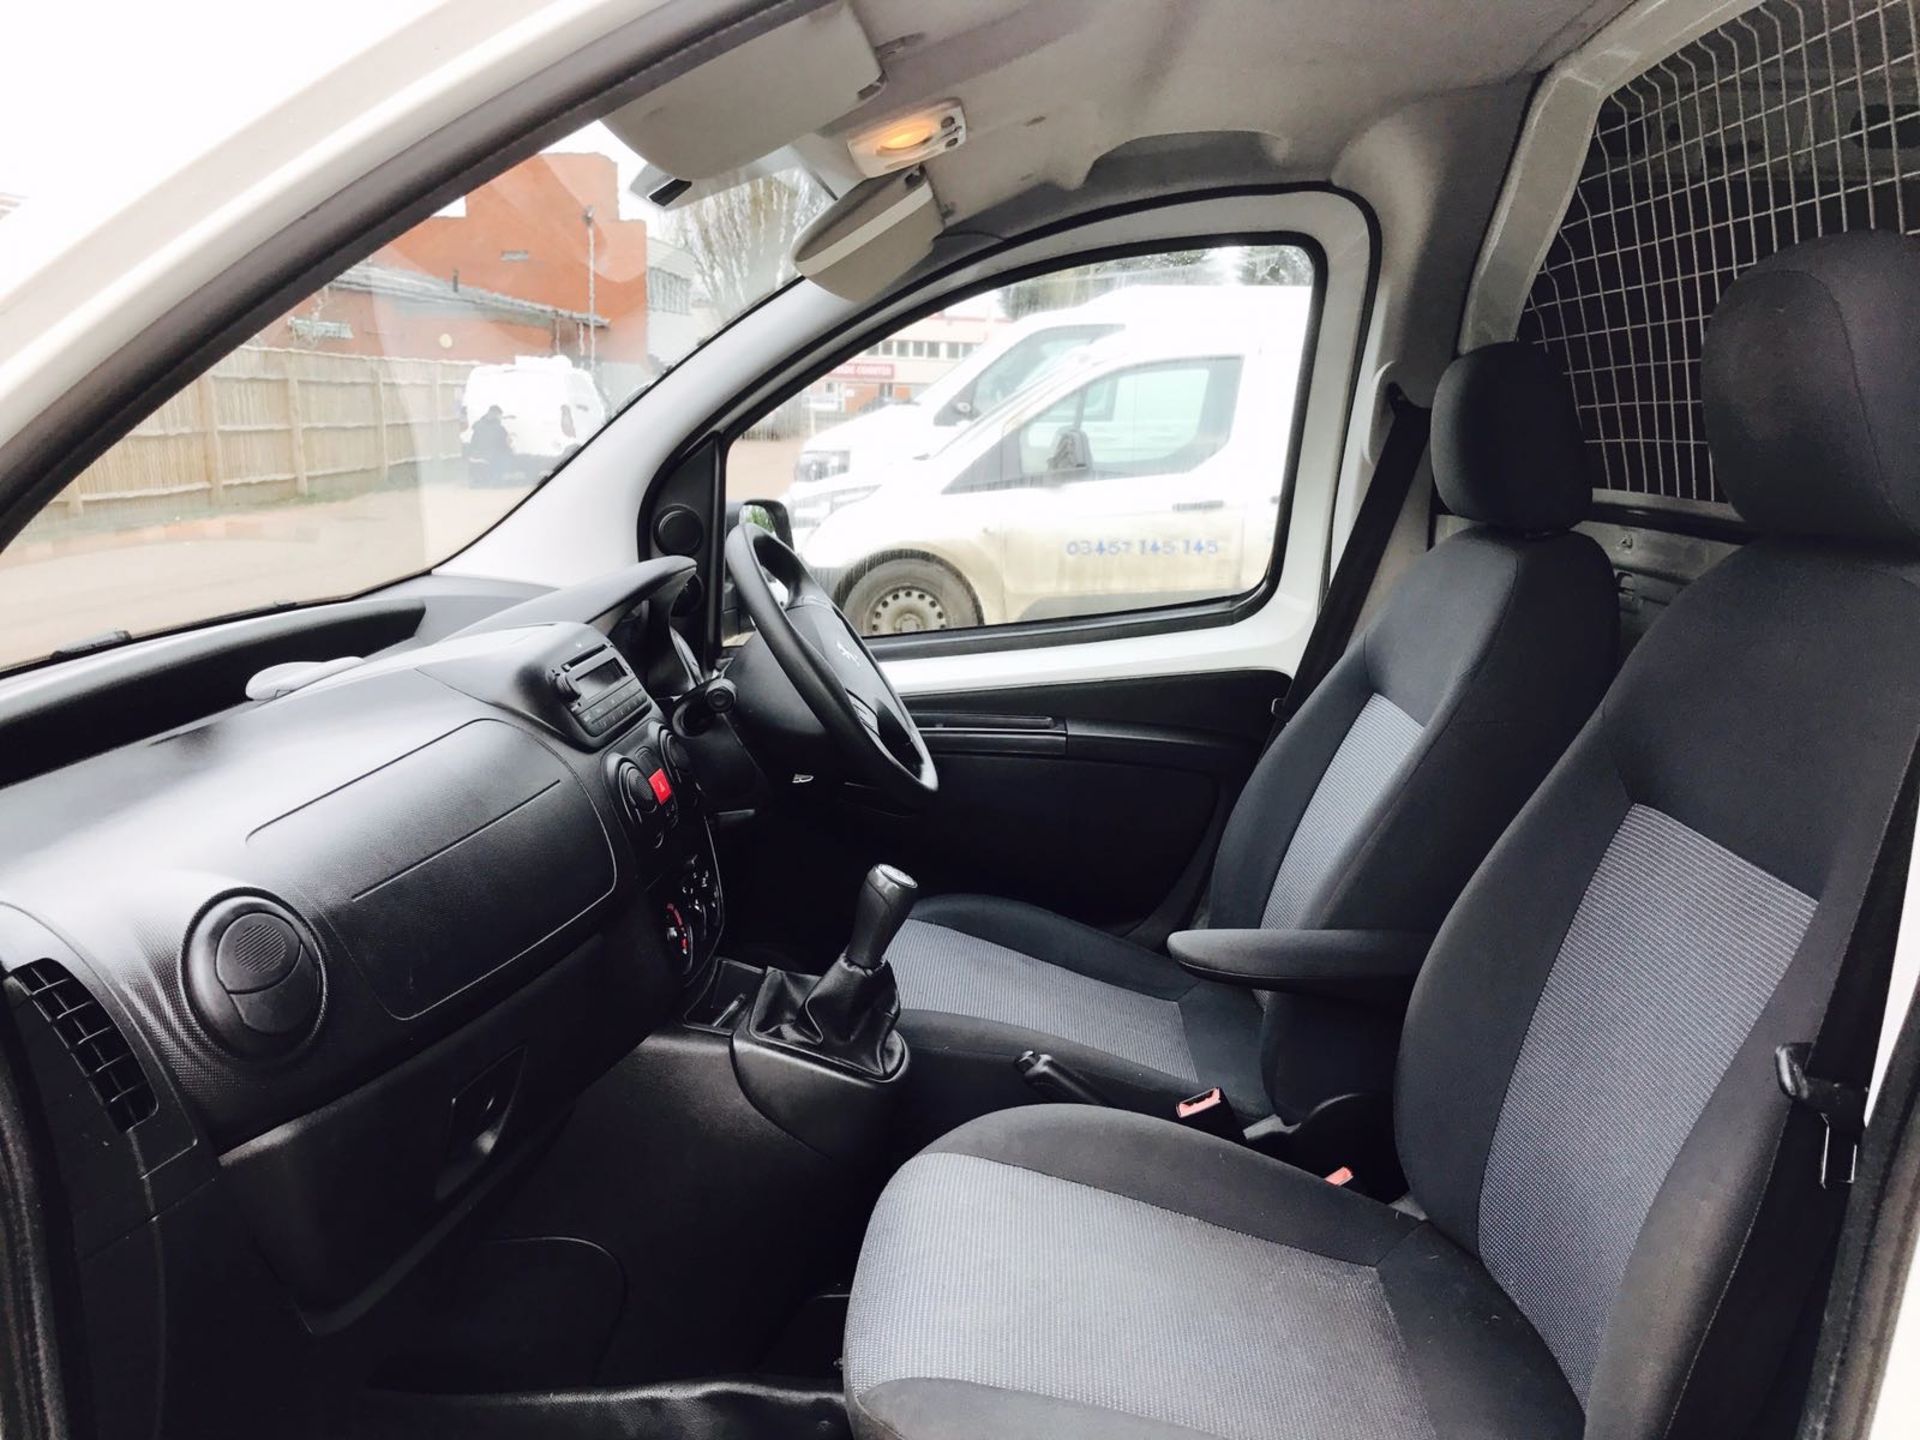 ON SALE PEUGEOT BIPPER 1.3HDI "PLUS PACK" - 2014 MODEL - 1 OWNER - AIR CON - BLUETOOTH - LOW MILES!! - Image 13 of 18